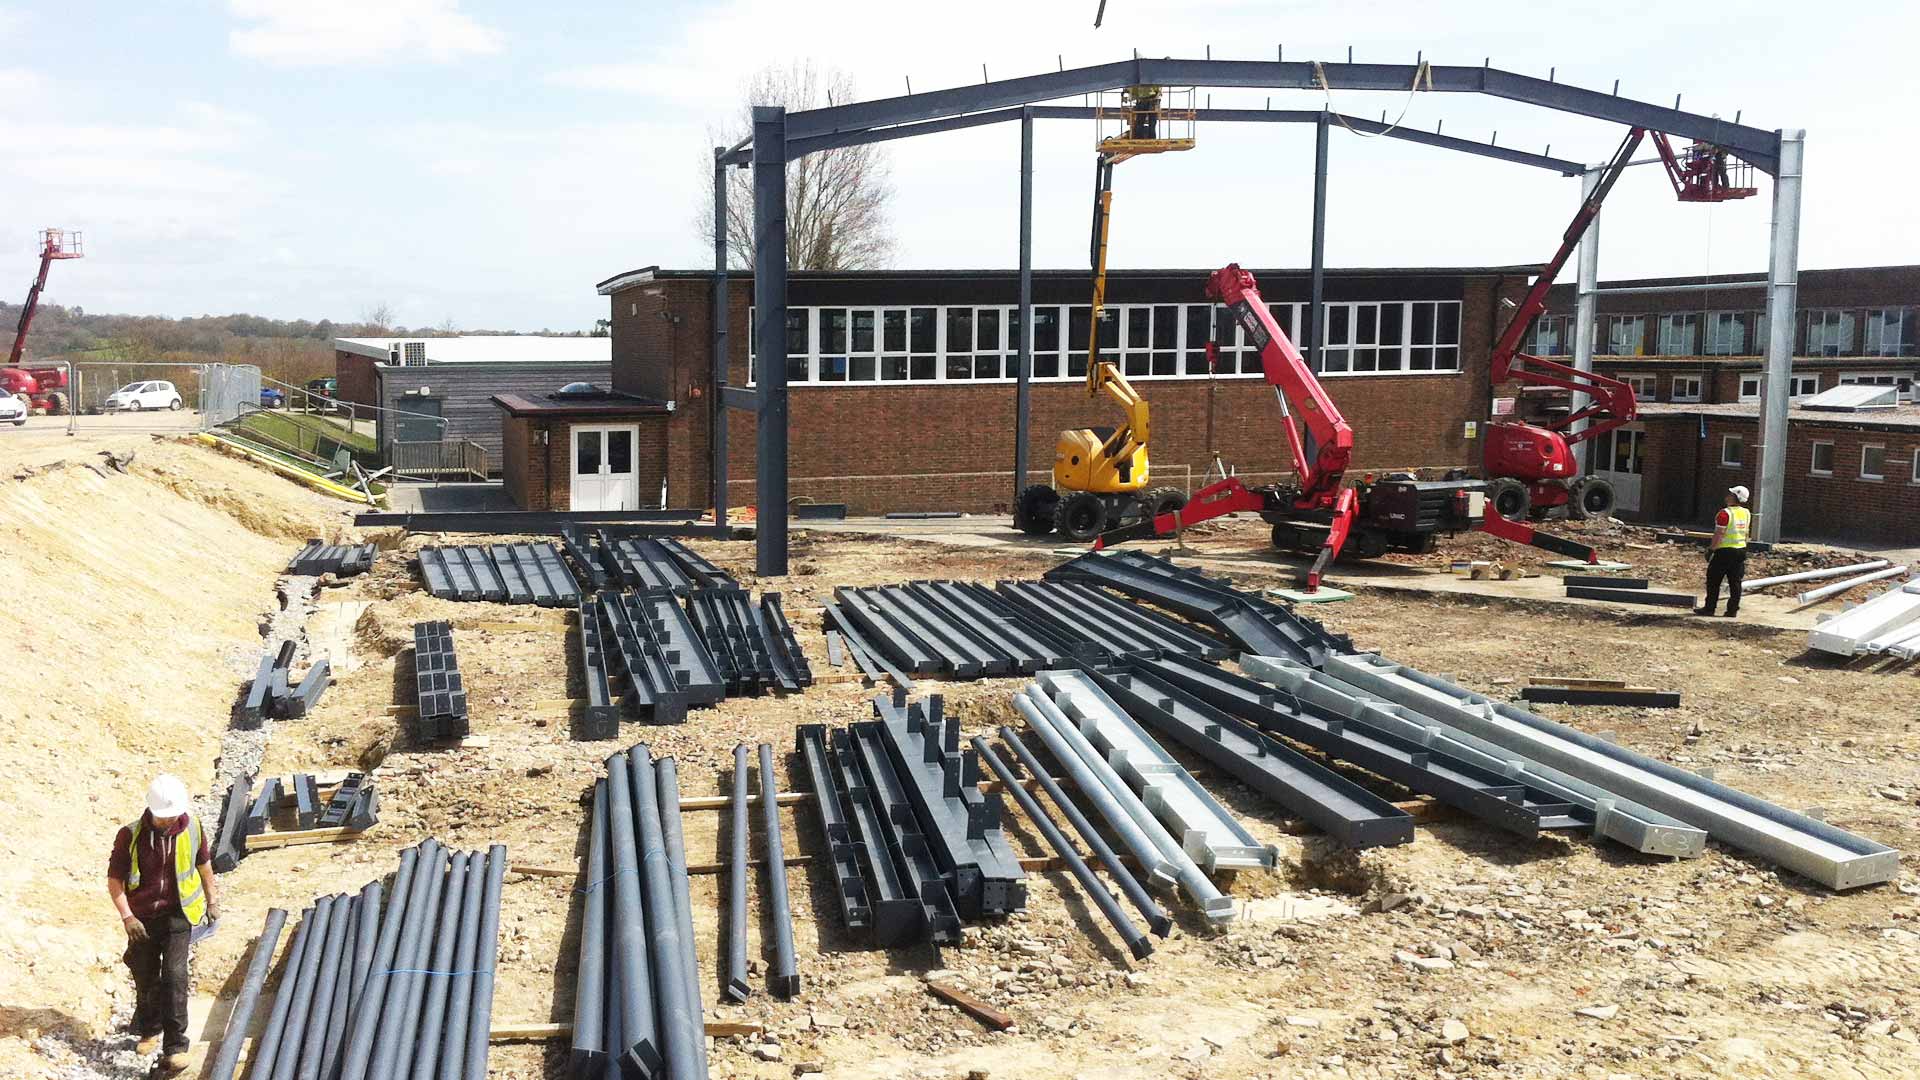 Steel frame sports hall under construction. Steel frame components lying on the floor.